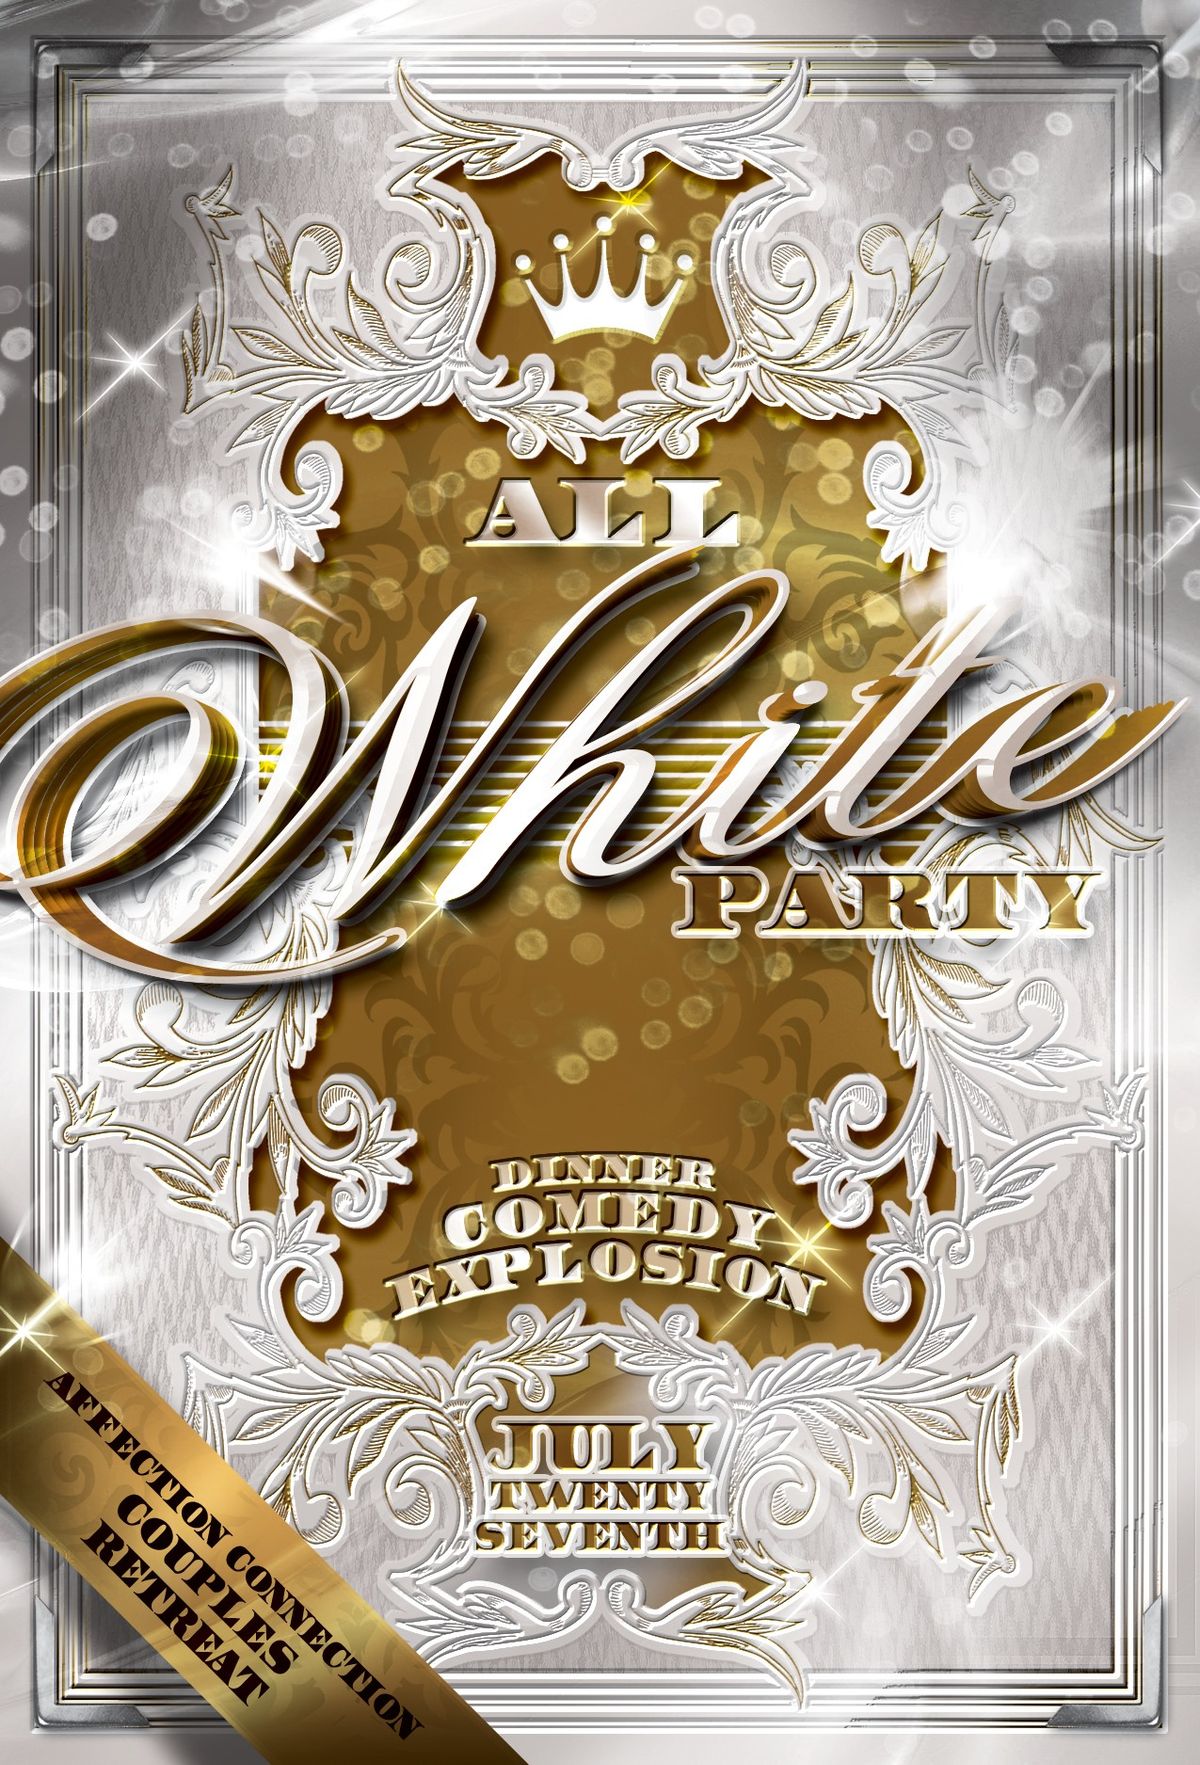 HOUSTON | All White Affair Comedy Dinner Explosion & After Party